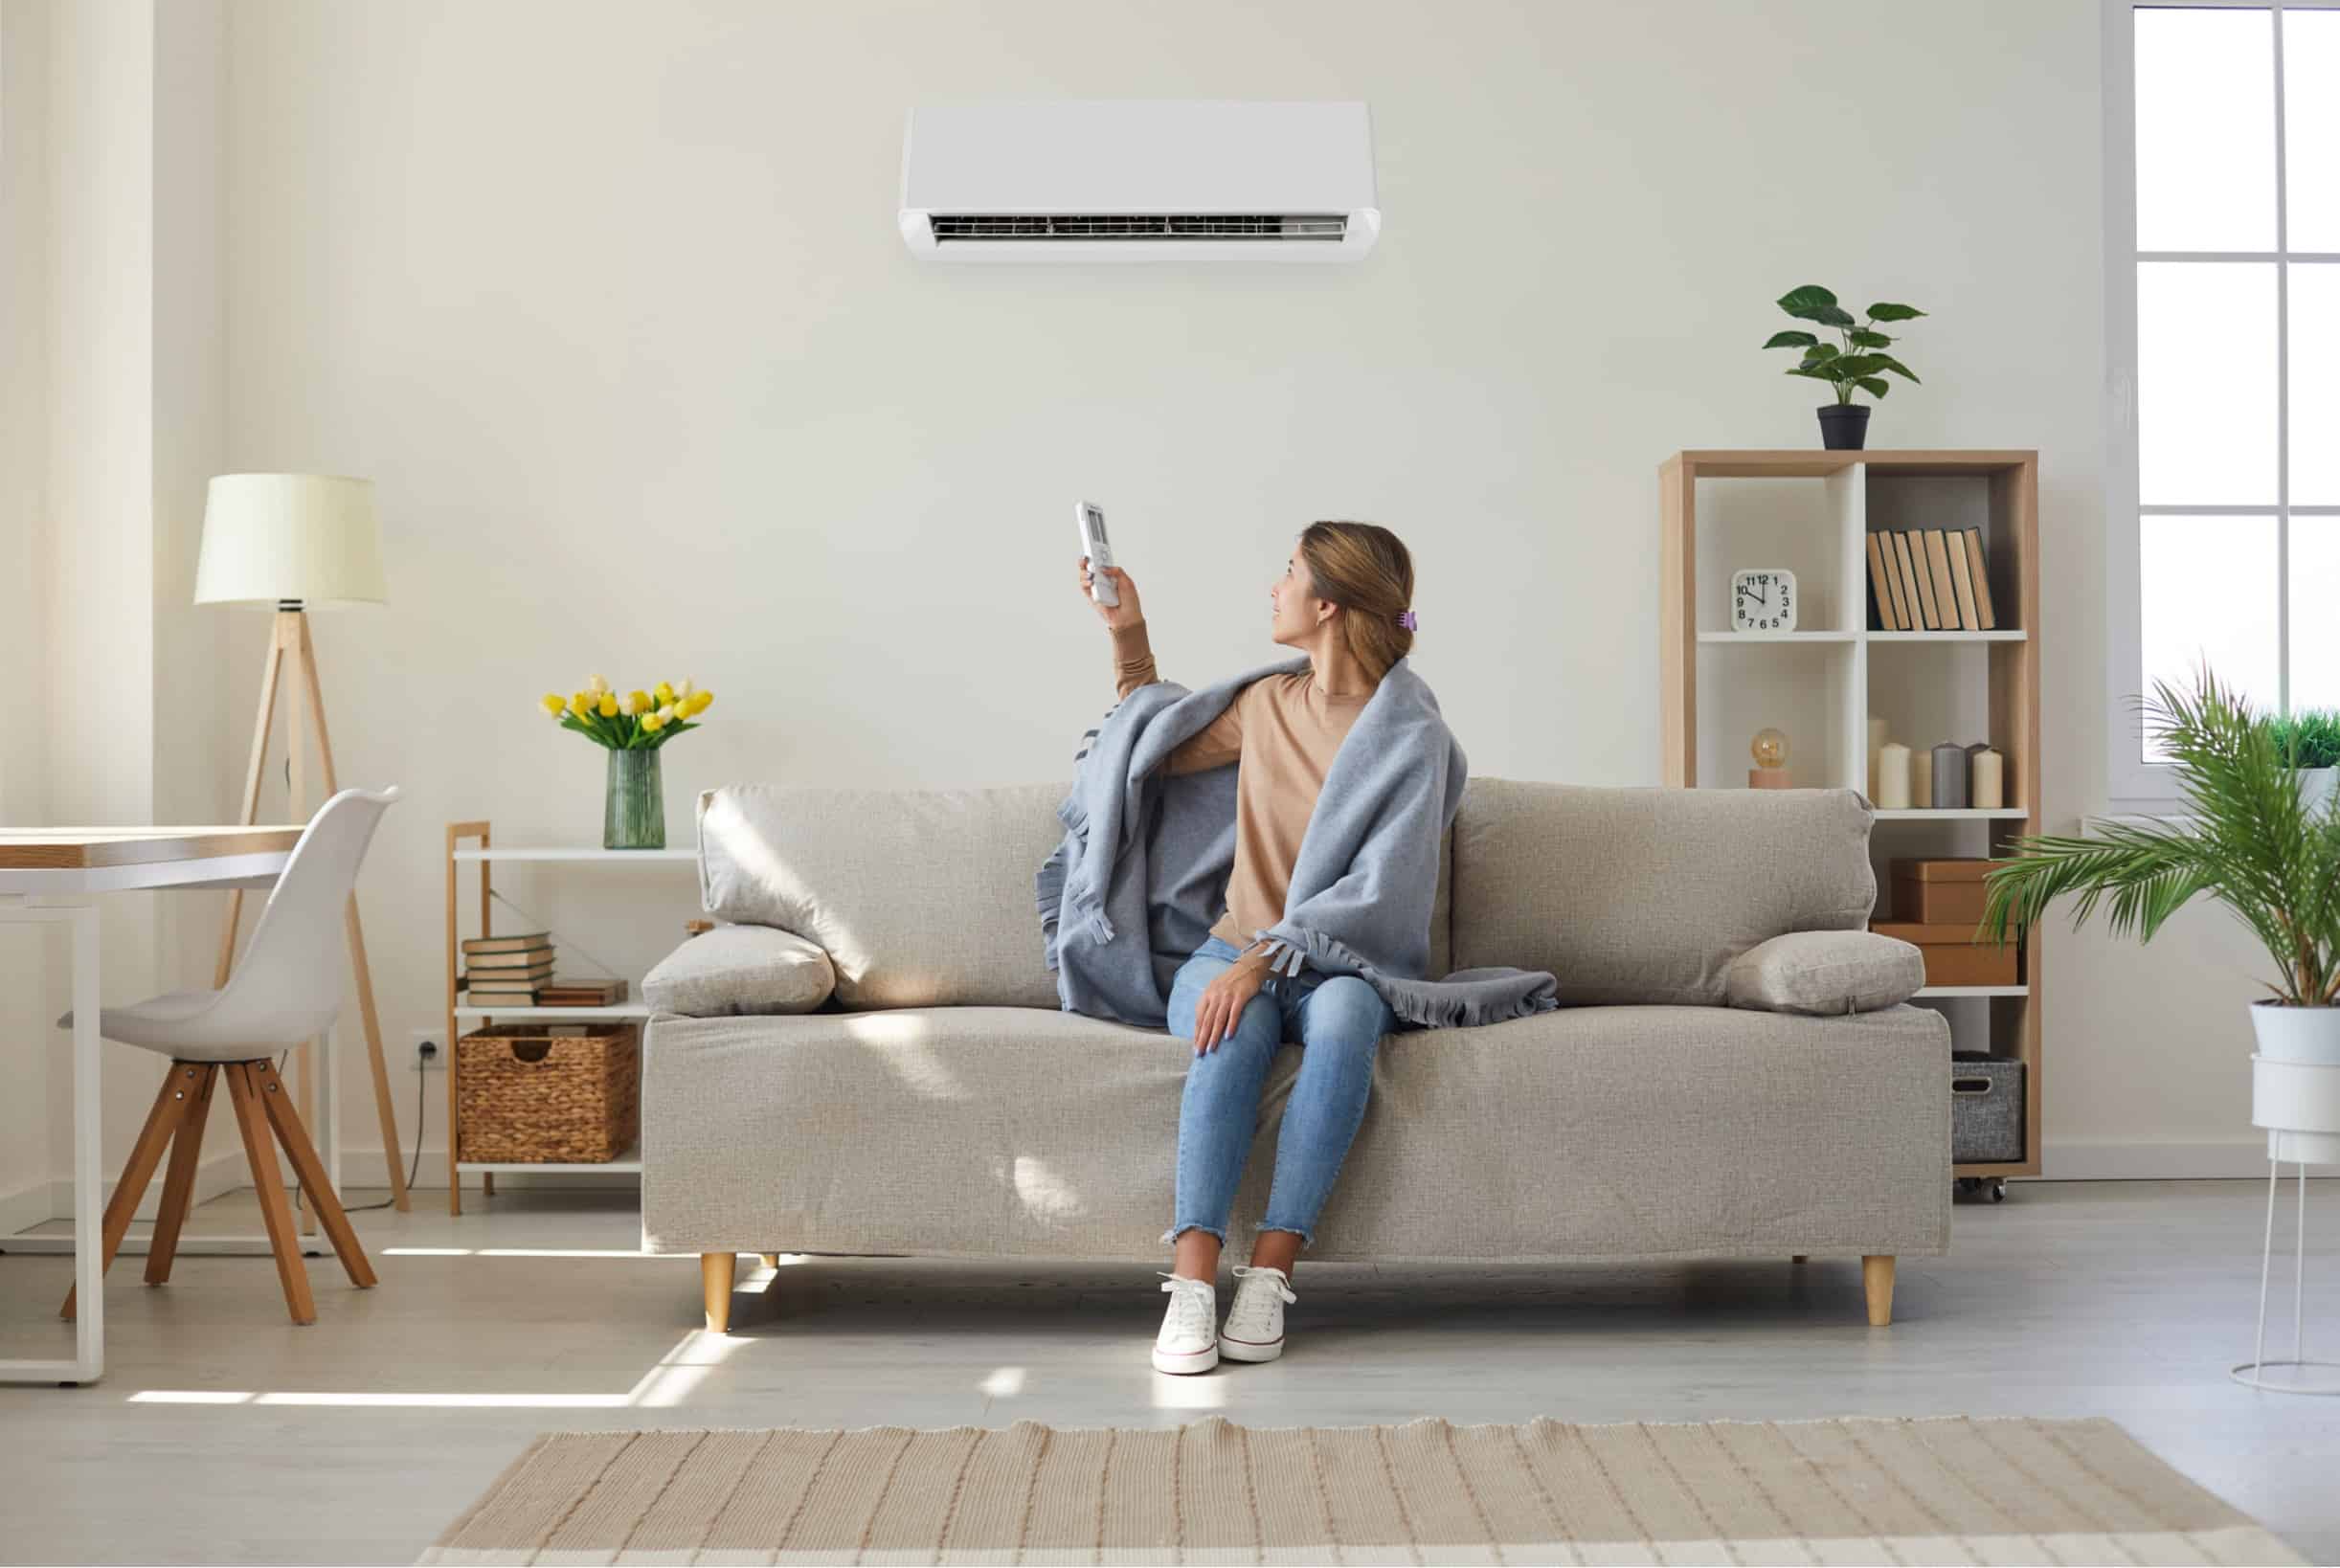 HVAC Replacements For Home Comfort